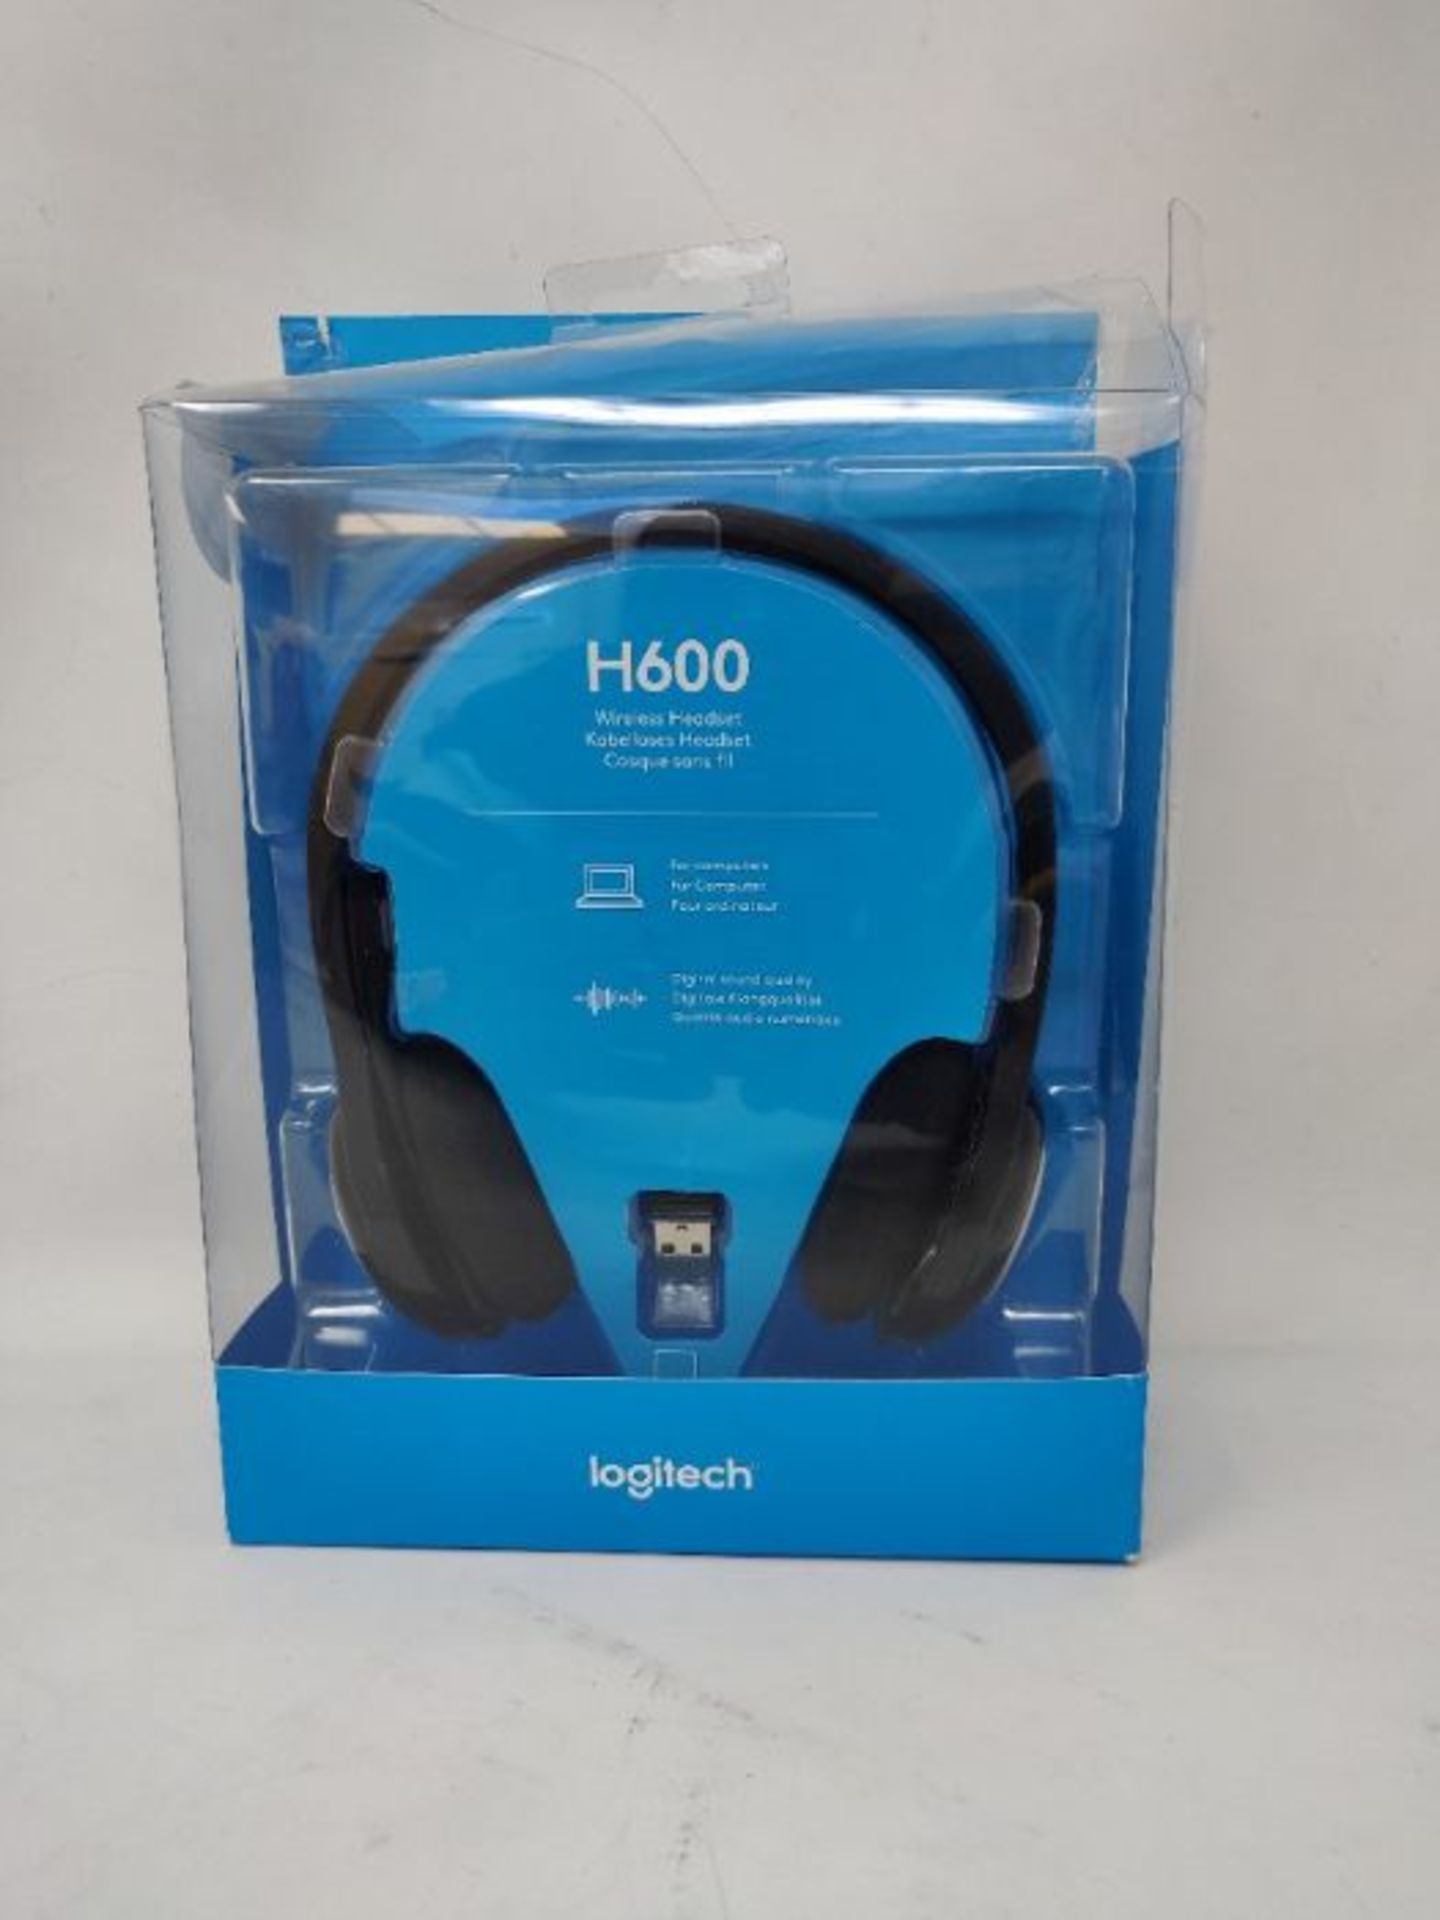 RRP £51.00 Logitech H600 Wireless Headset, Stereo Headphones with Rotating Noise-Cancelling Micro - Image 2 of 3